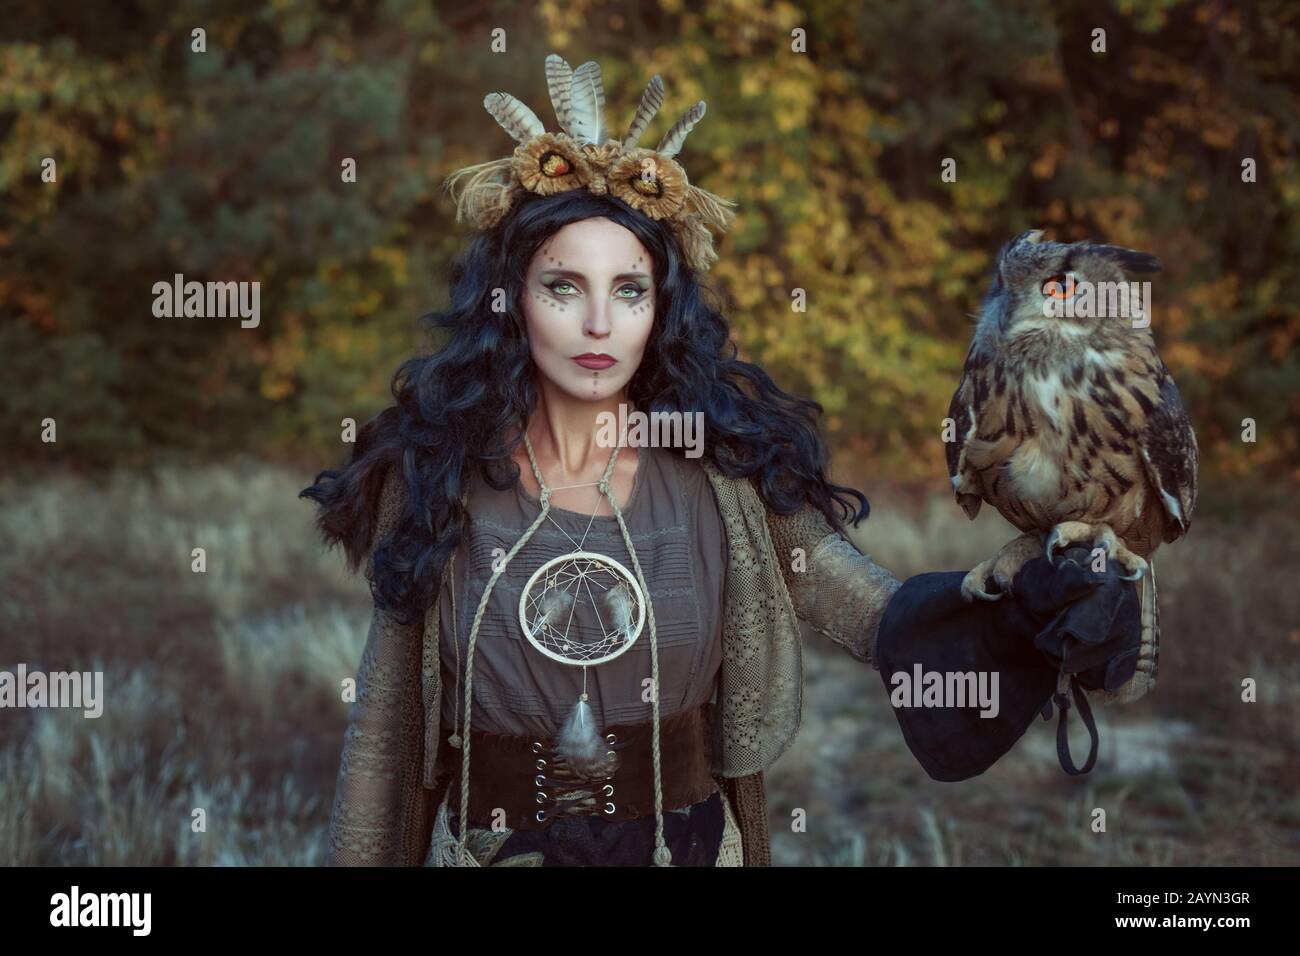 Portrait of a shaman woman in the forest. She has an eagle owl in her hand. Stock Photo